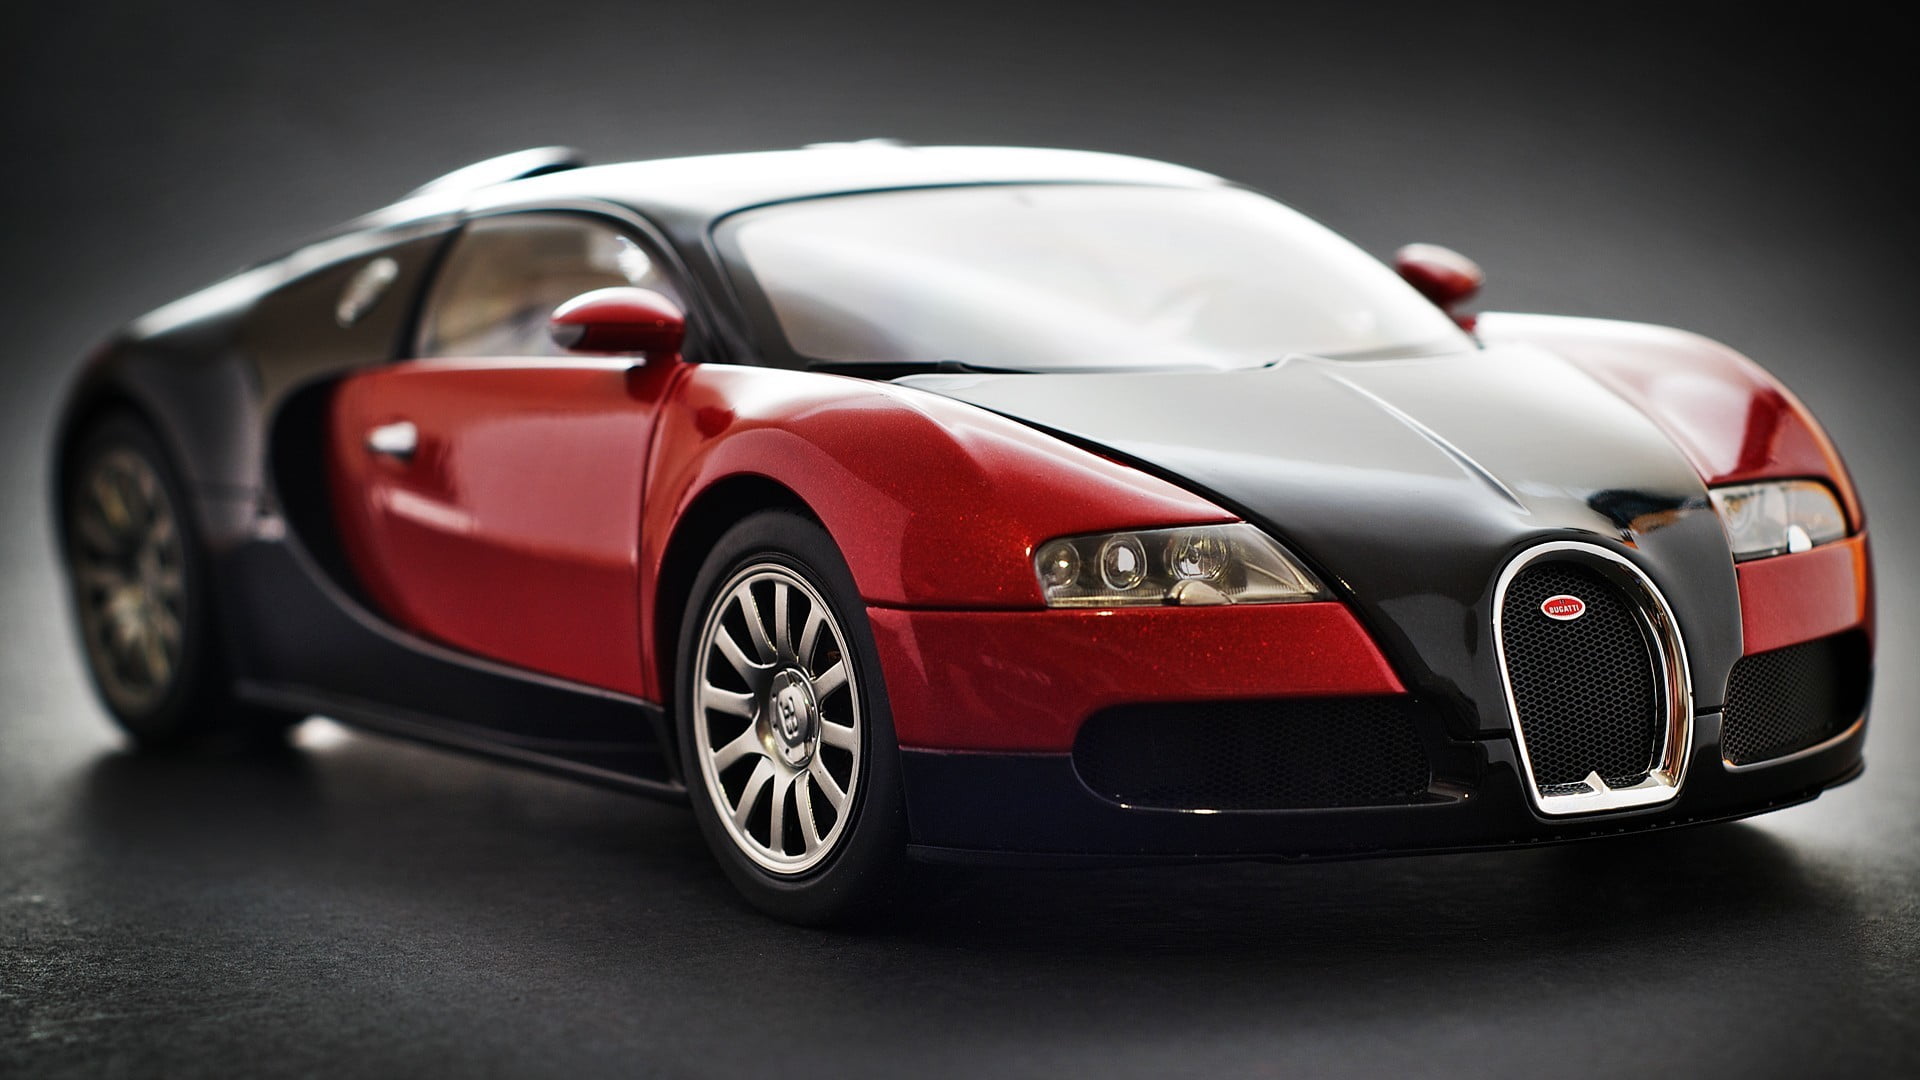 red and black convertible coupe, Bugatti Veyron, car